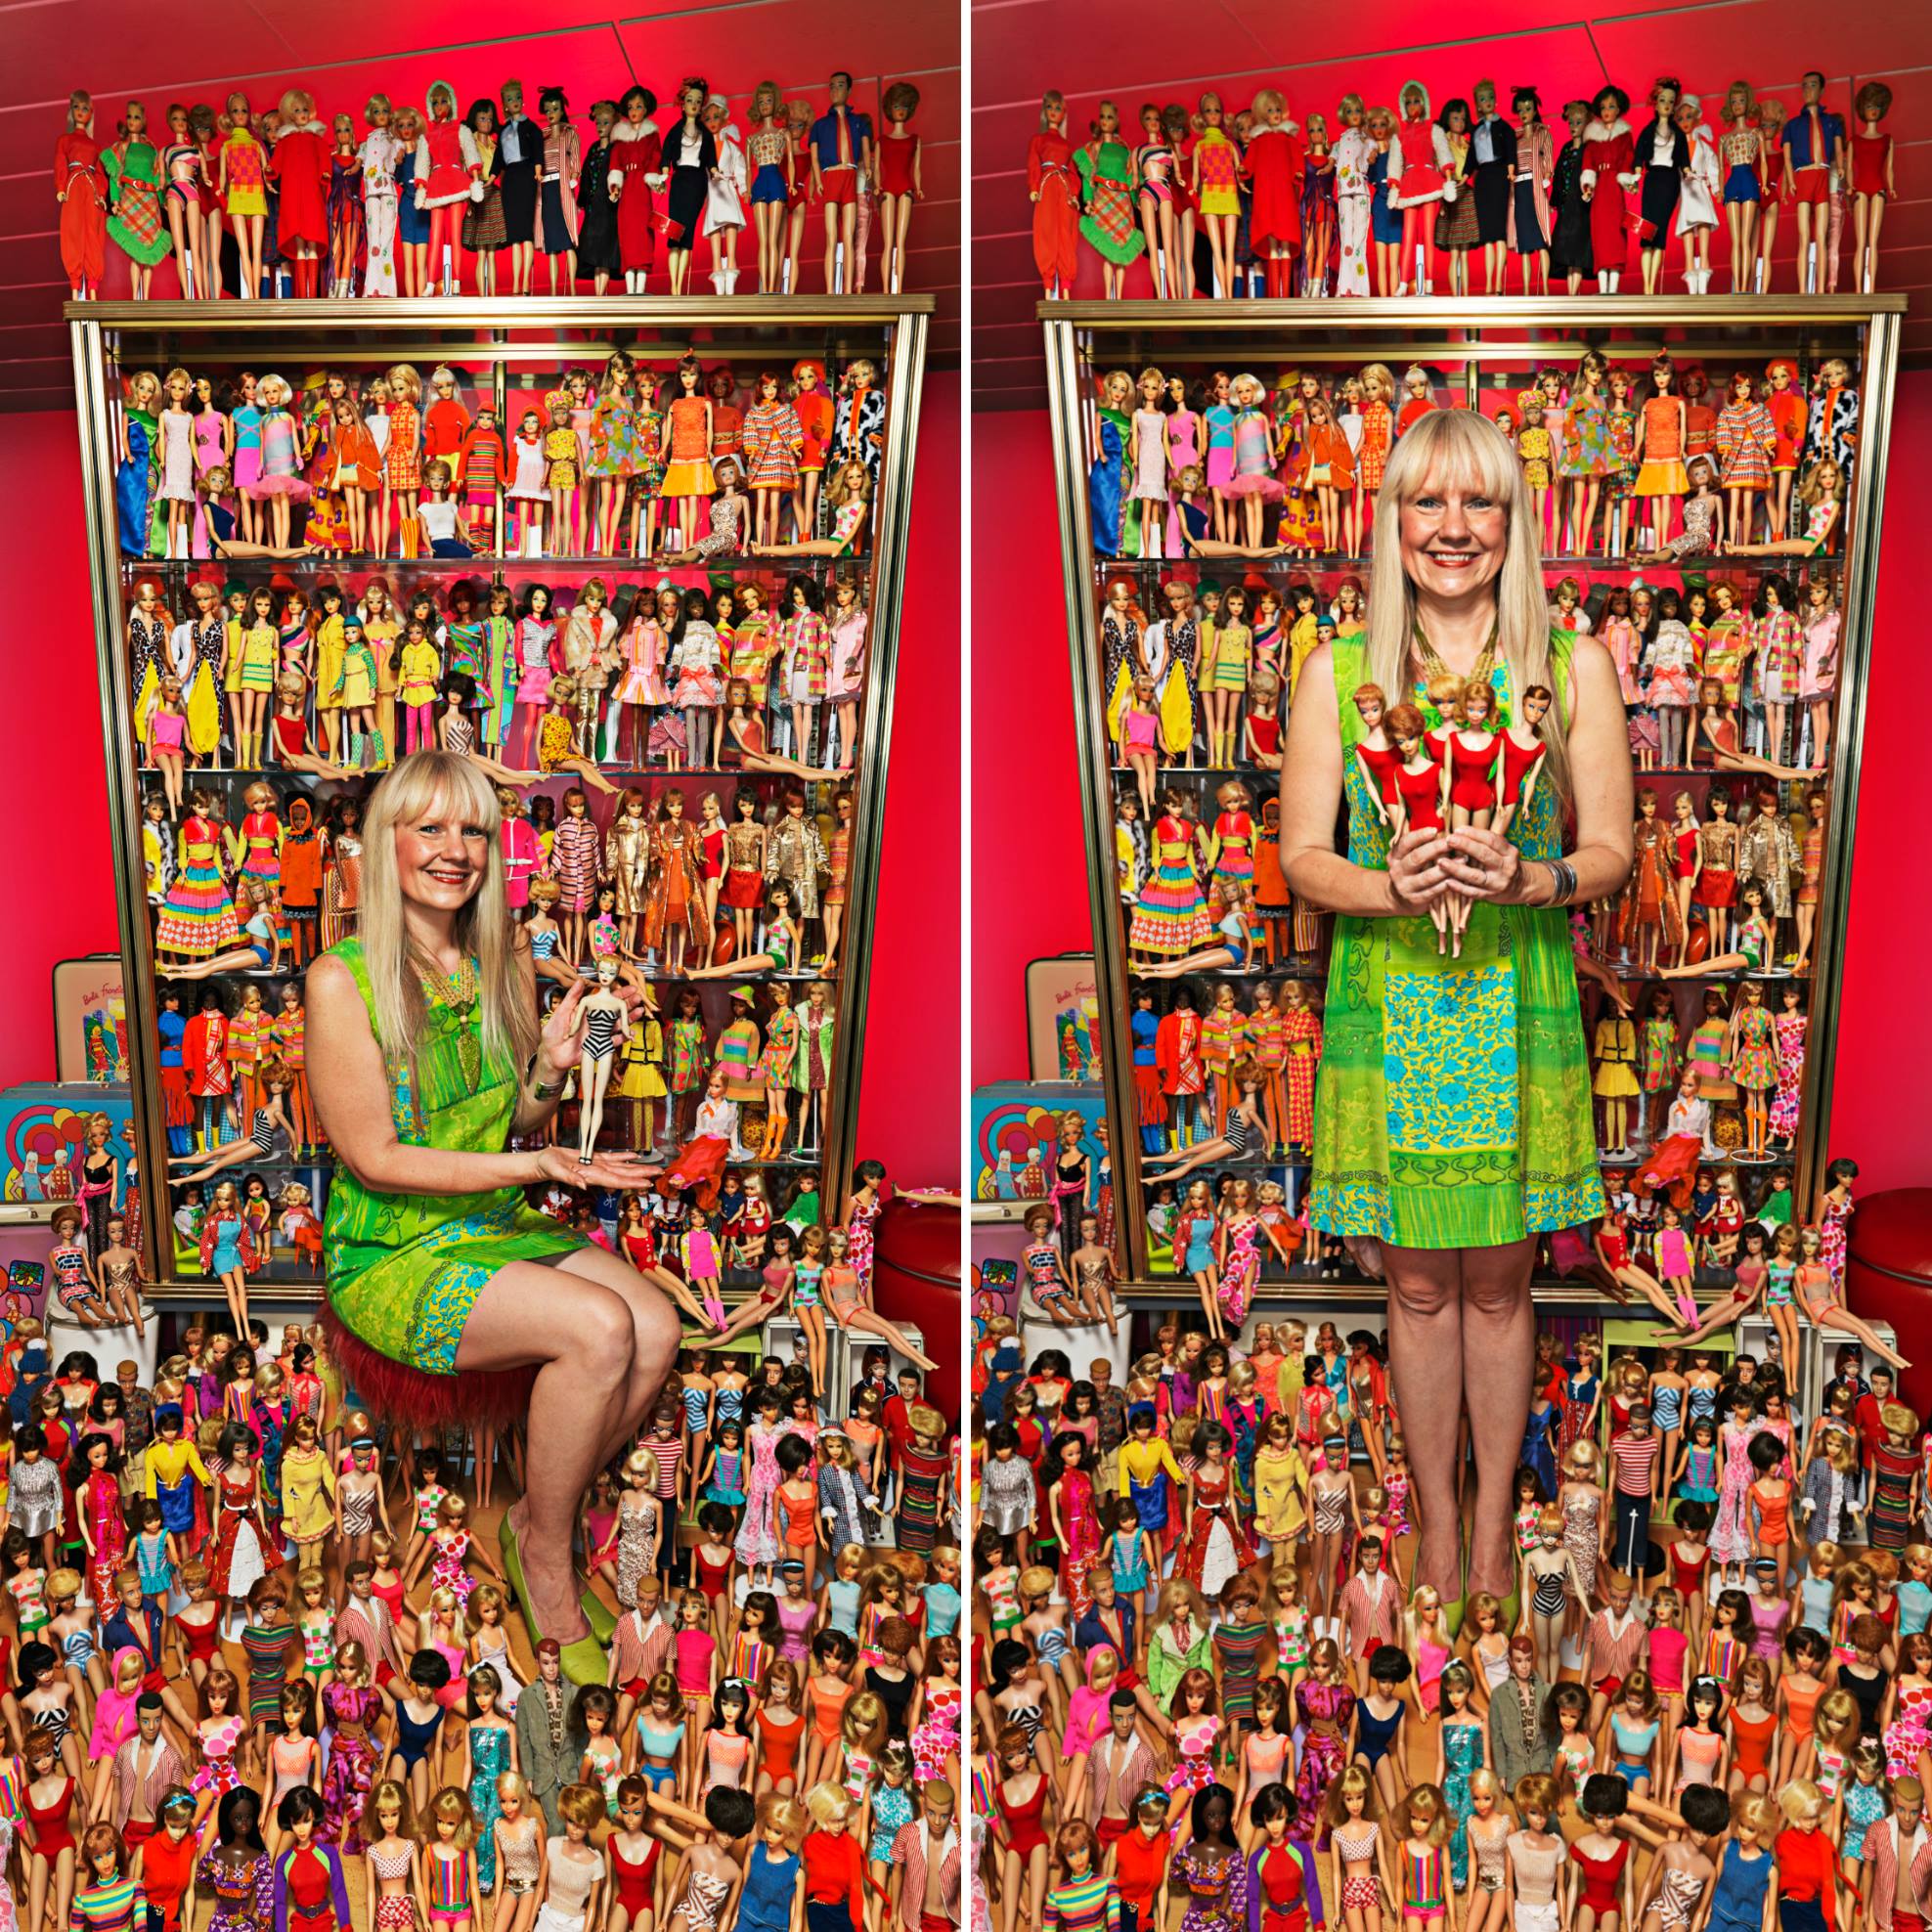 8 facts about barbie that will leave you with an identity crisis... For just a bit